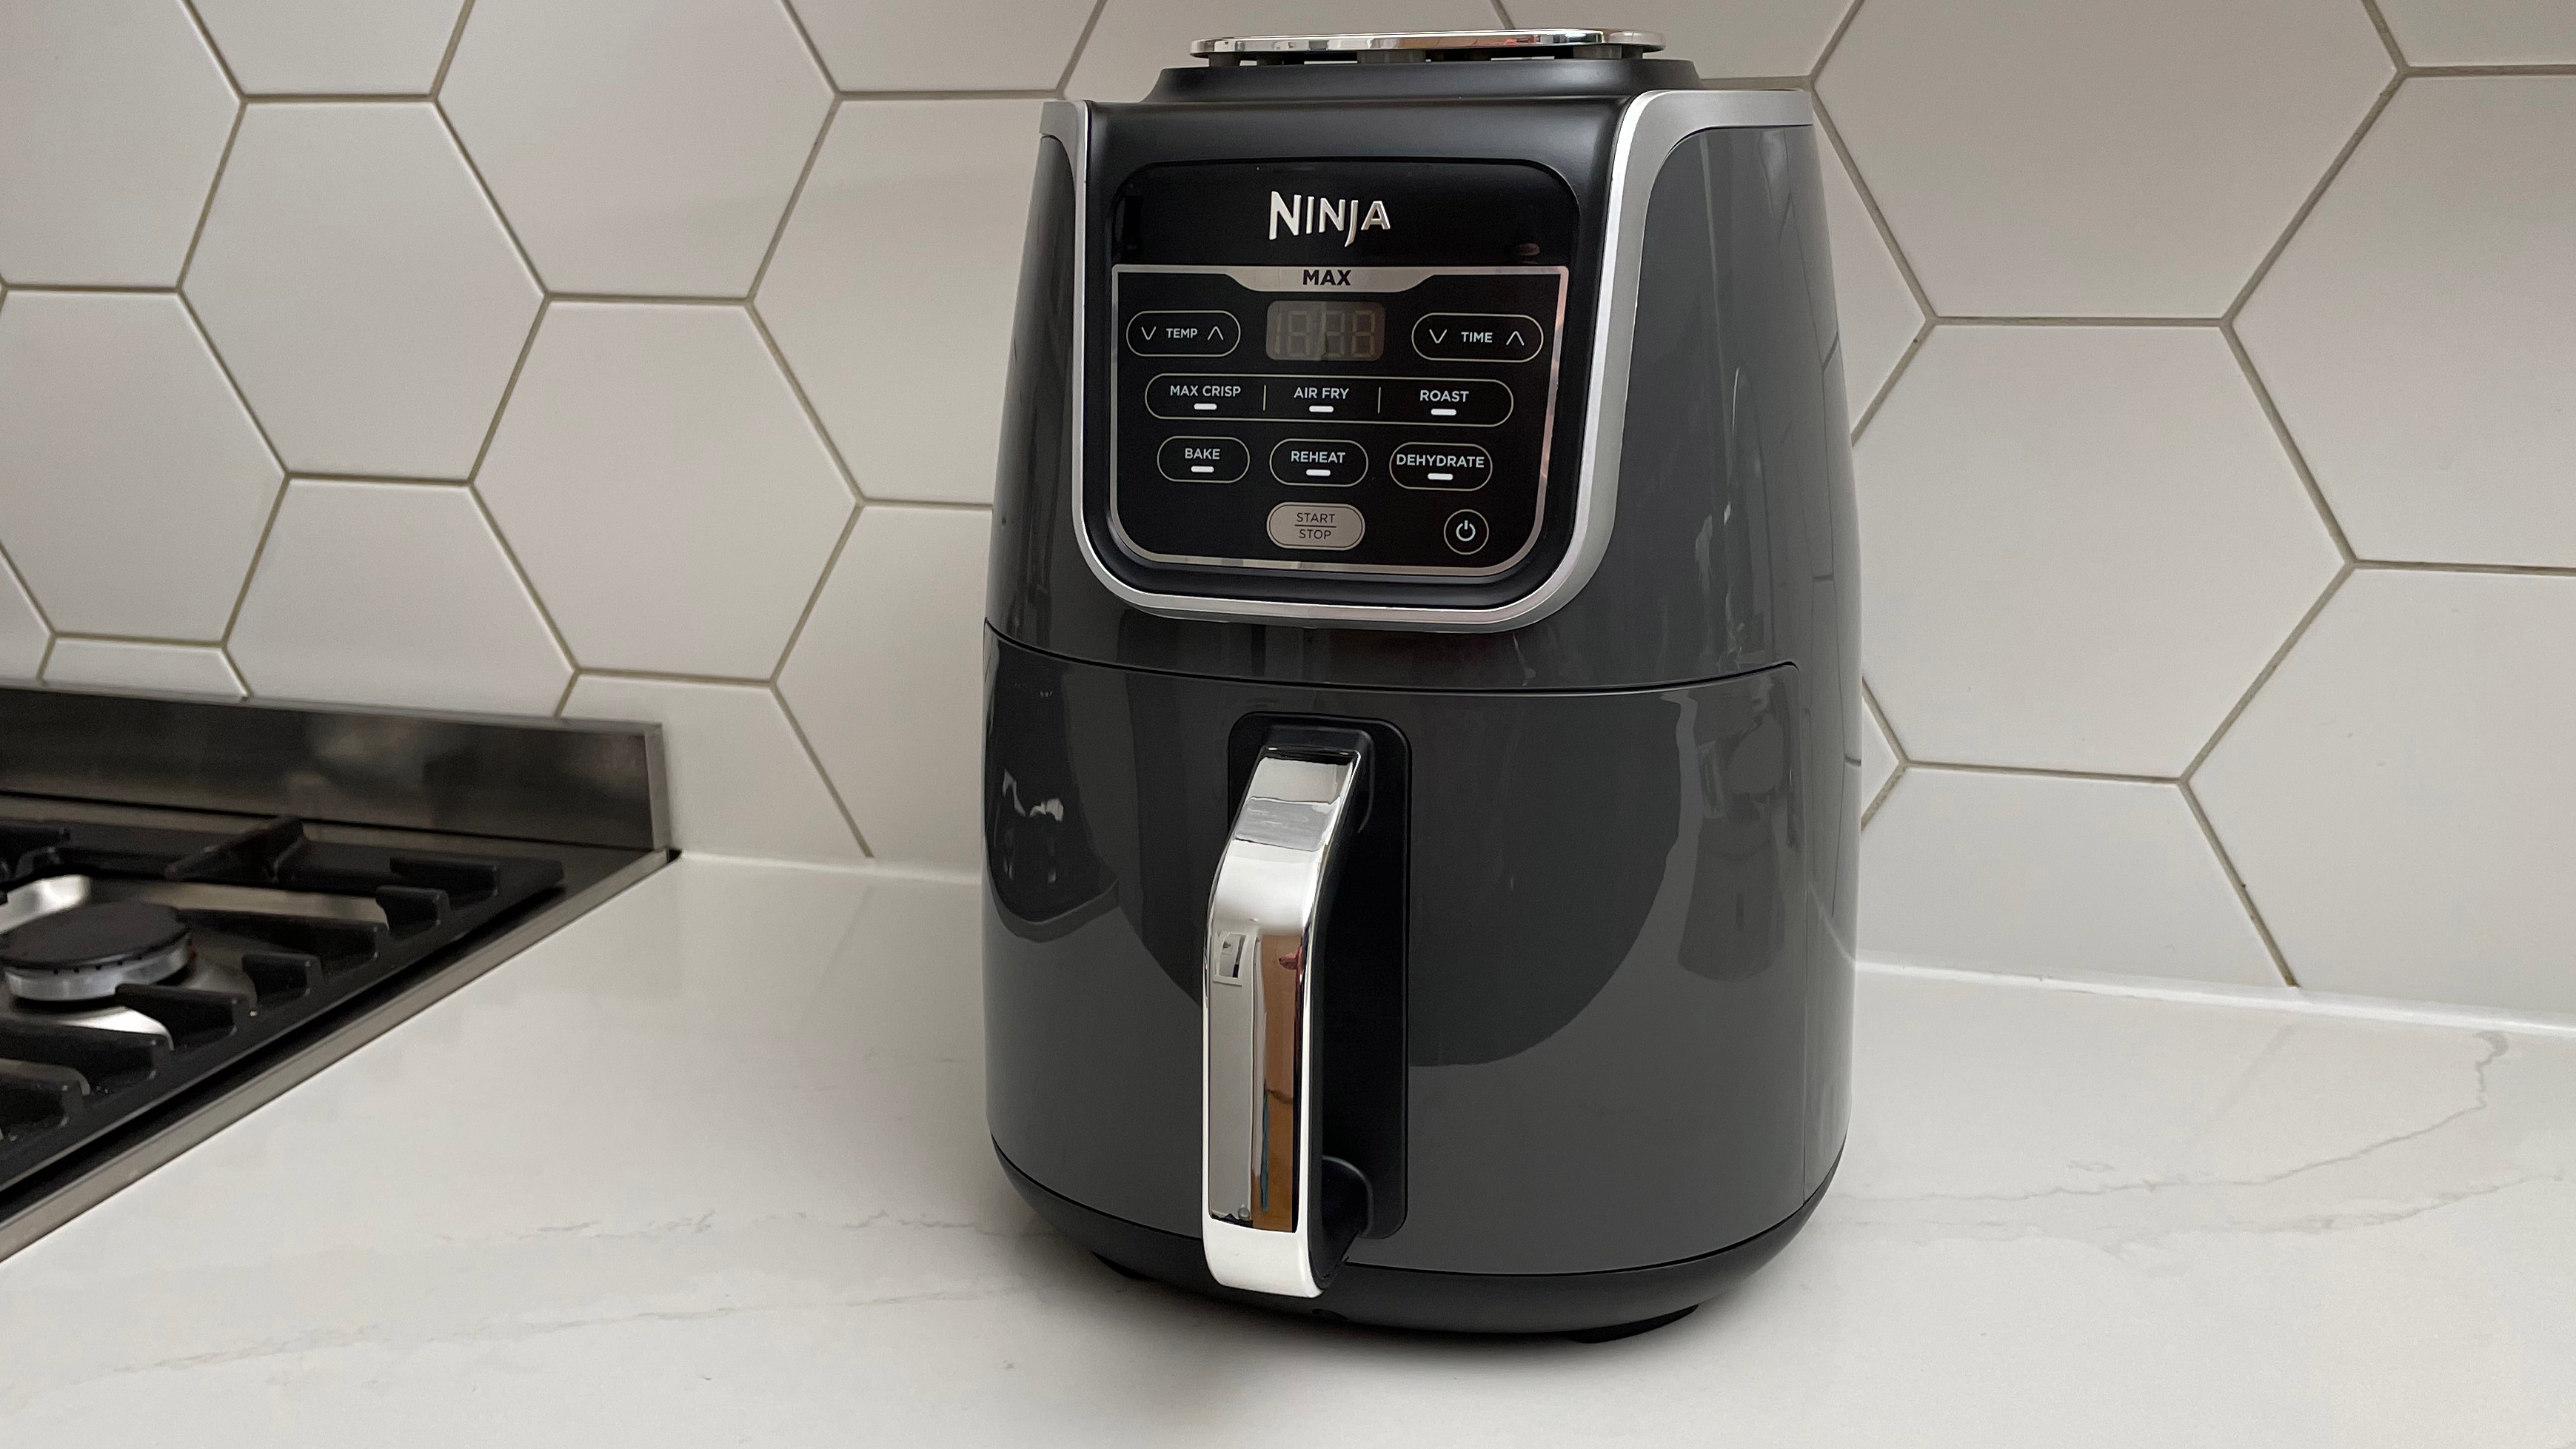 Ninja Air Max AF160 fryer on the kitchen counter